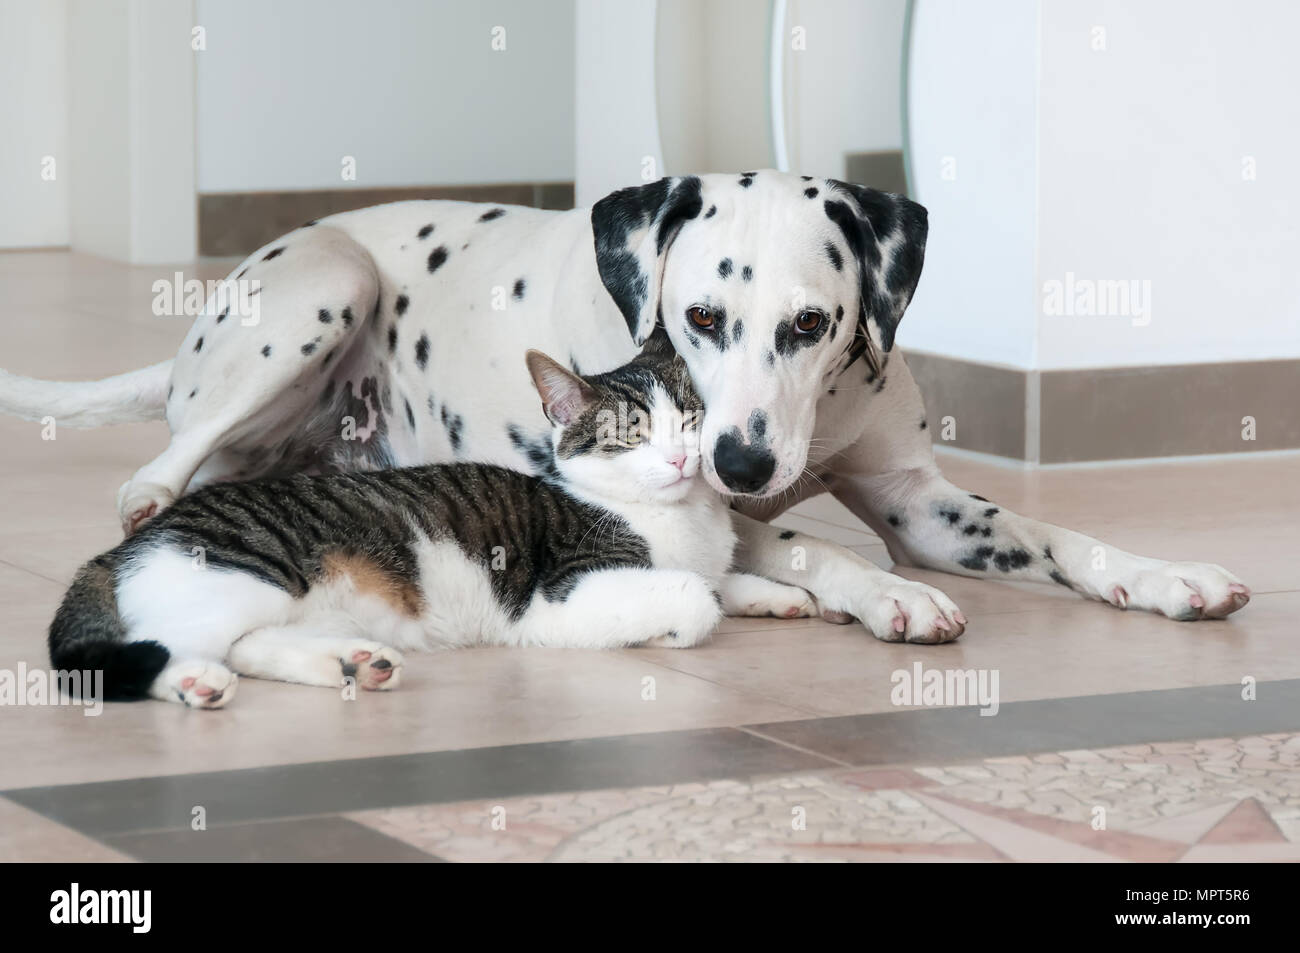 A cute tabby cat and a Dalmatian dog lying side by side and huggle together, they love one another, a close friendship between the dog and the kitty Stock Photo